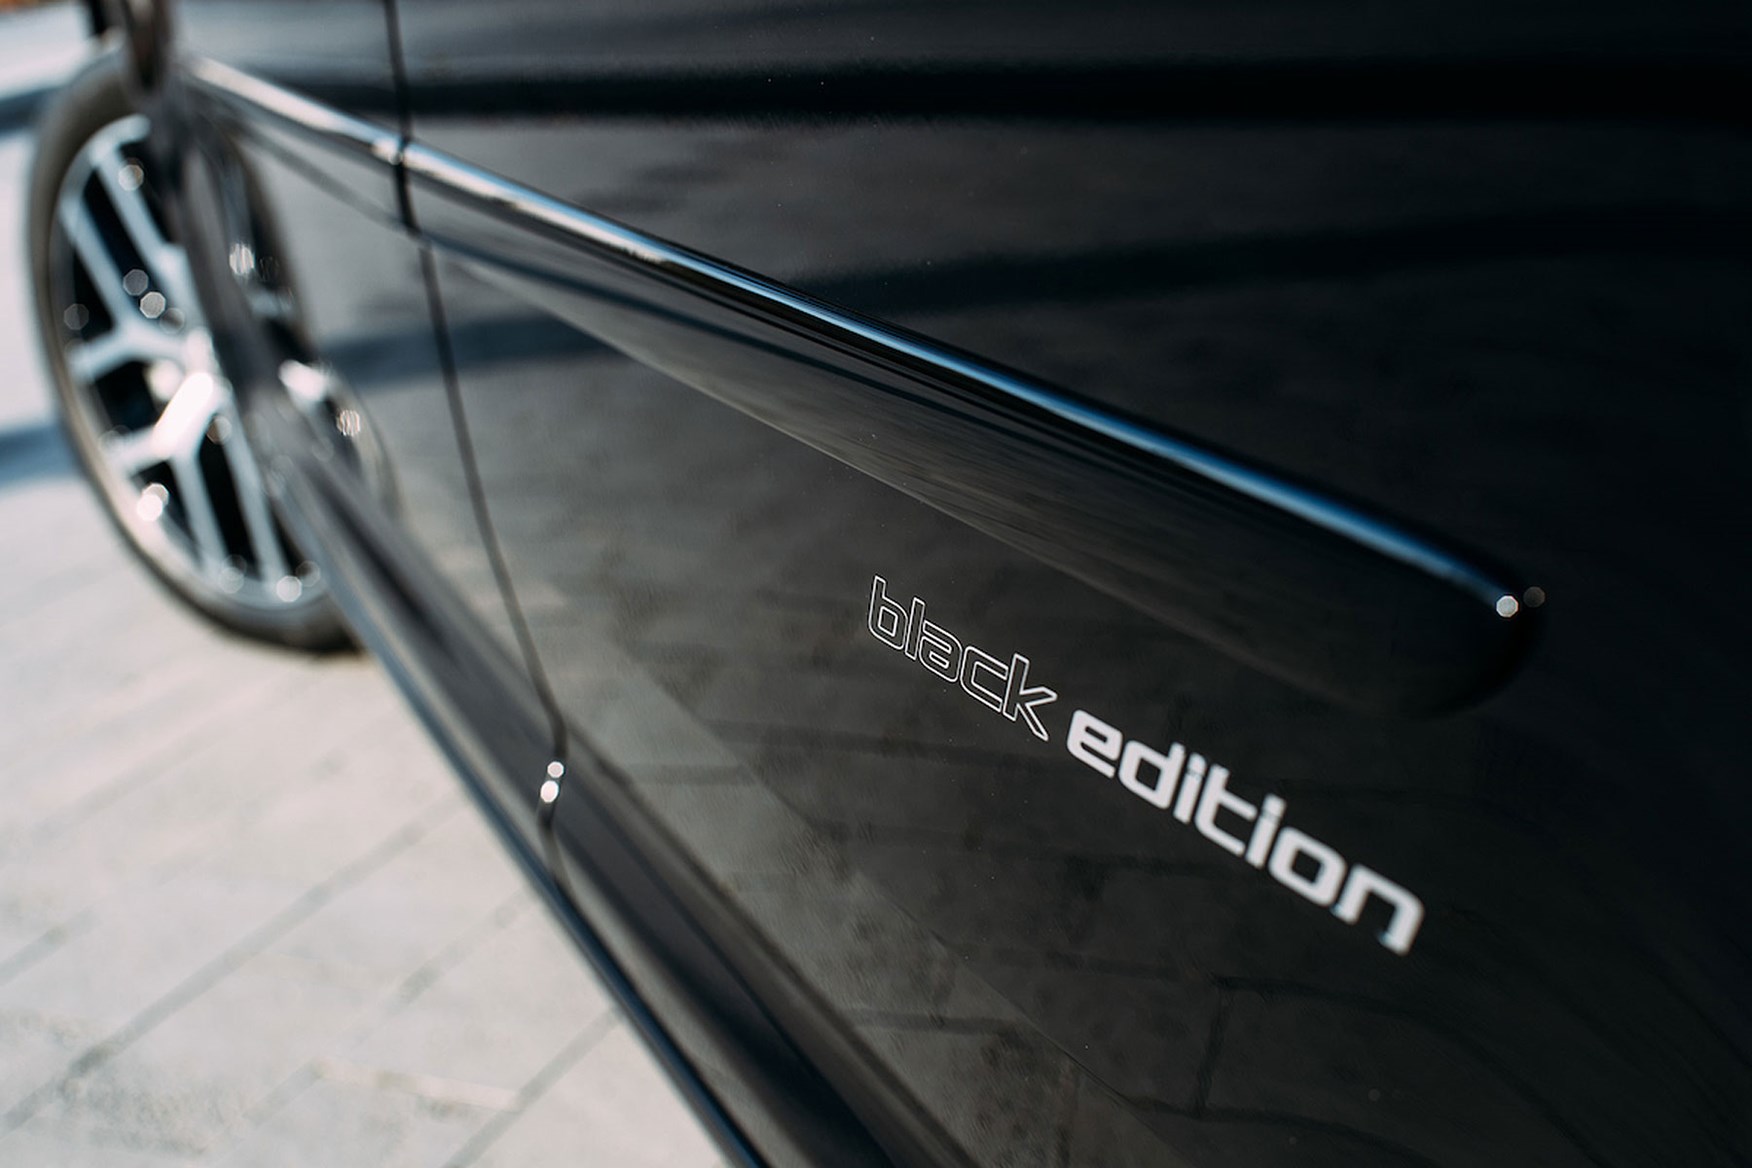 VW Caddy Black Edition review - Black Edition graphics on side, 2017